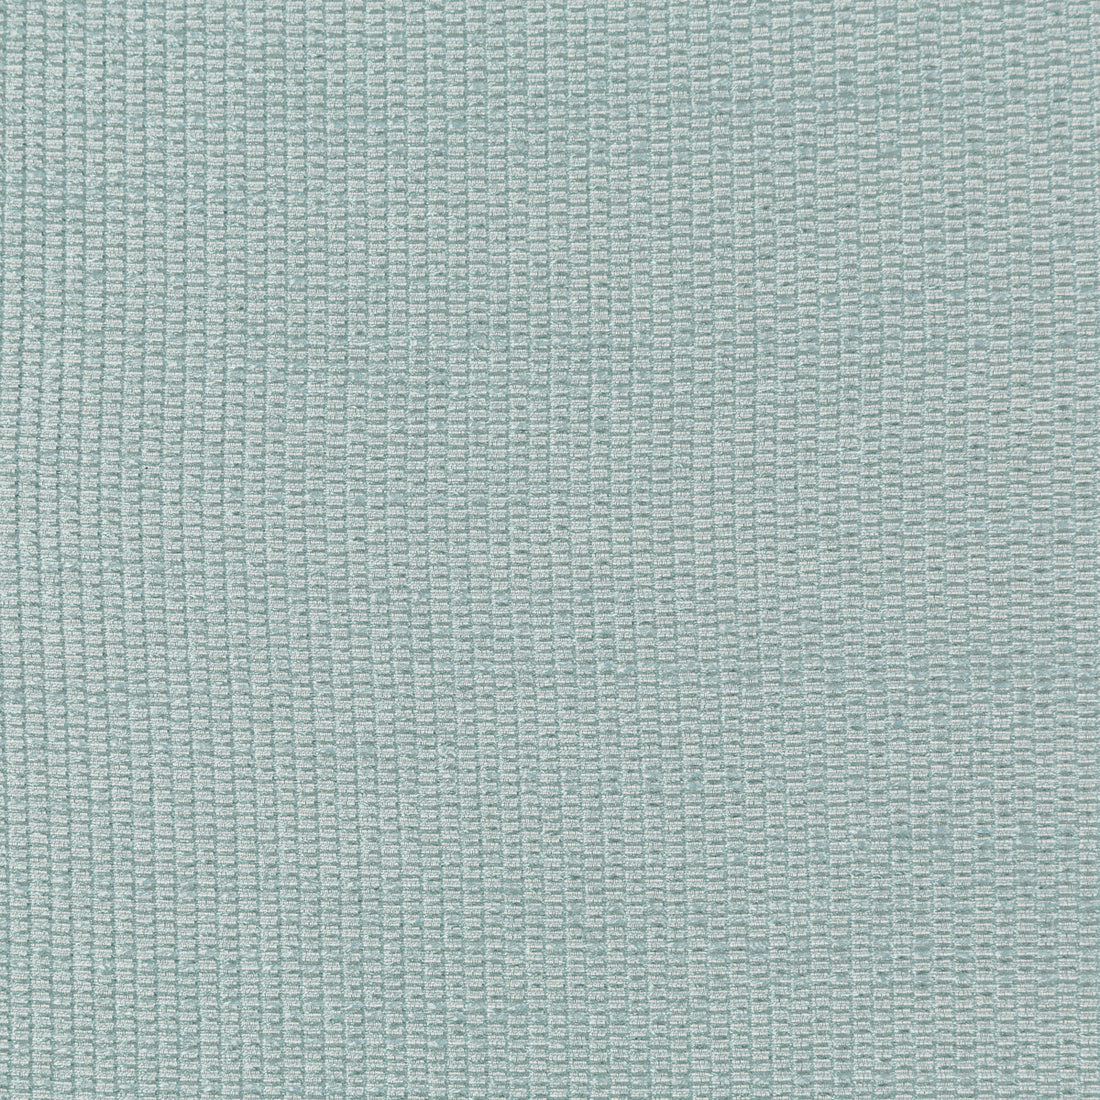 Hadley fabric in sea green color - pattern 4652.35.0 - by Kravet Contract